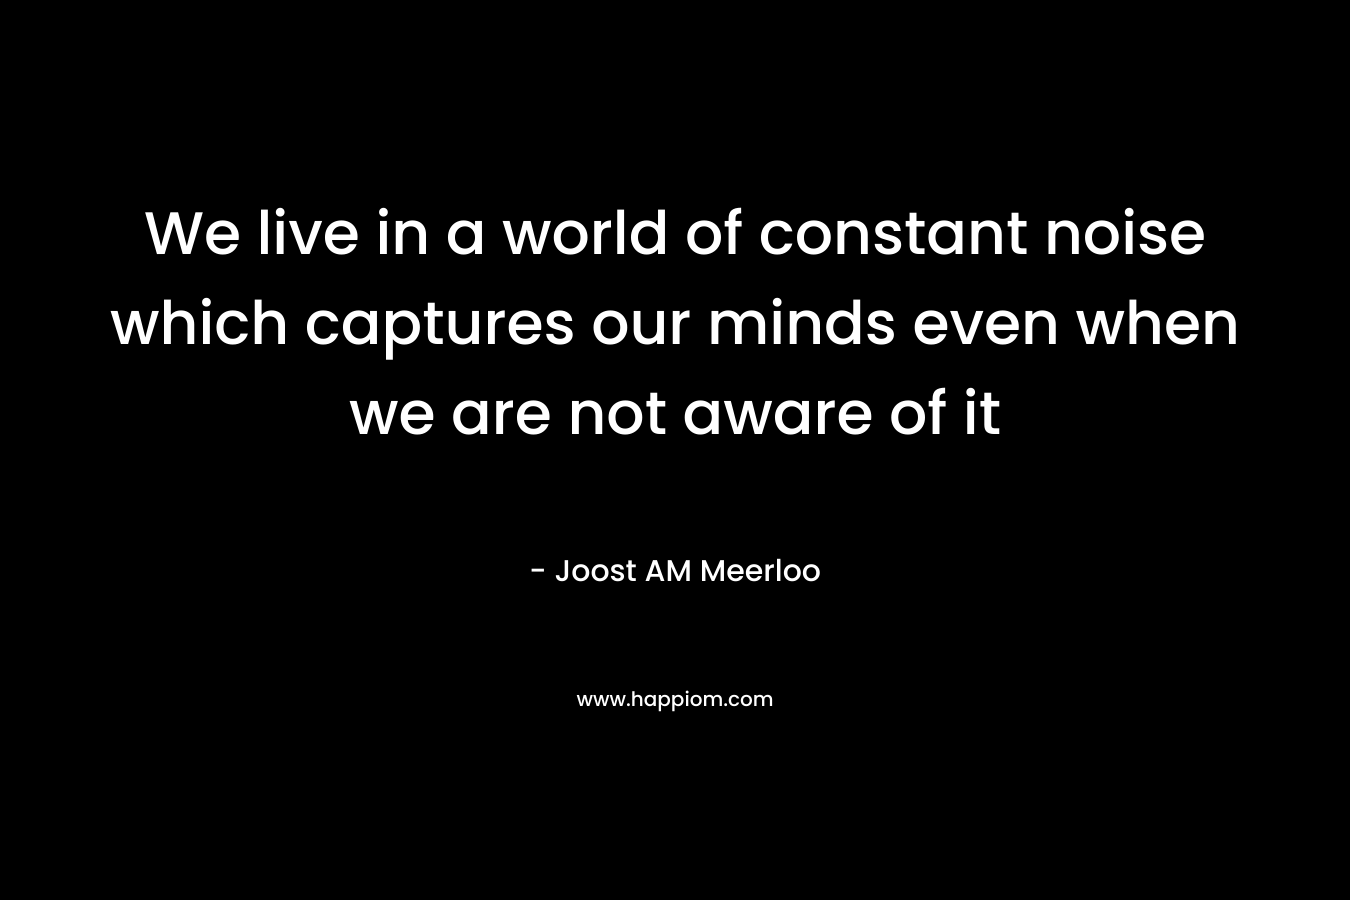 We live in a world of constant noise which captures our minds even when we are not aware of it – Joost AM Meerloo